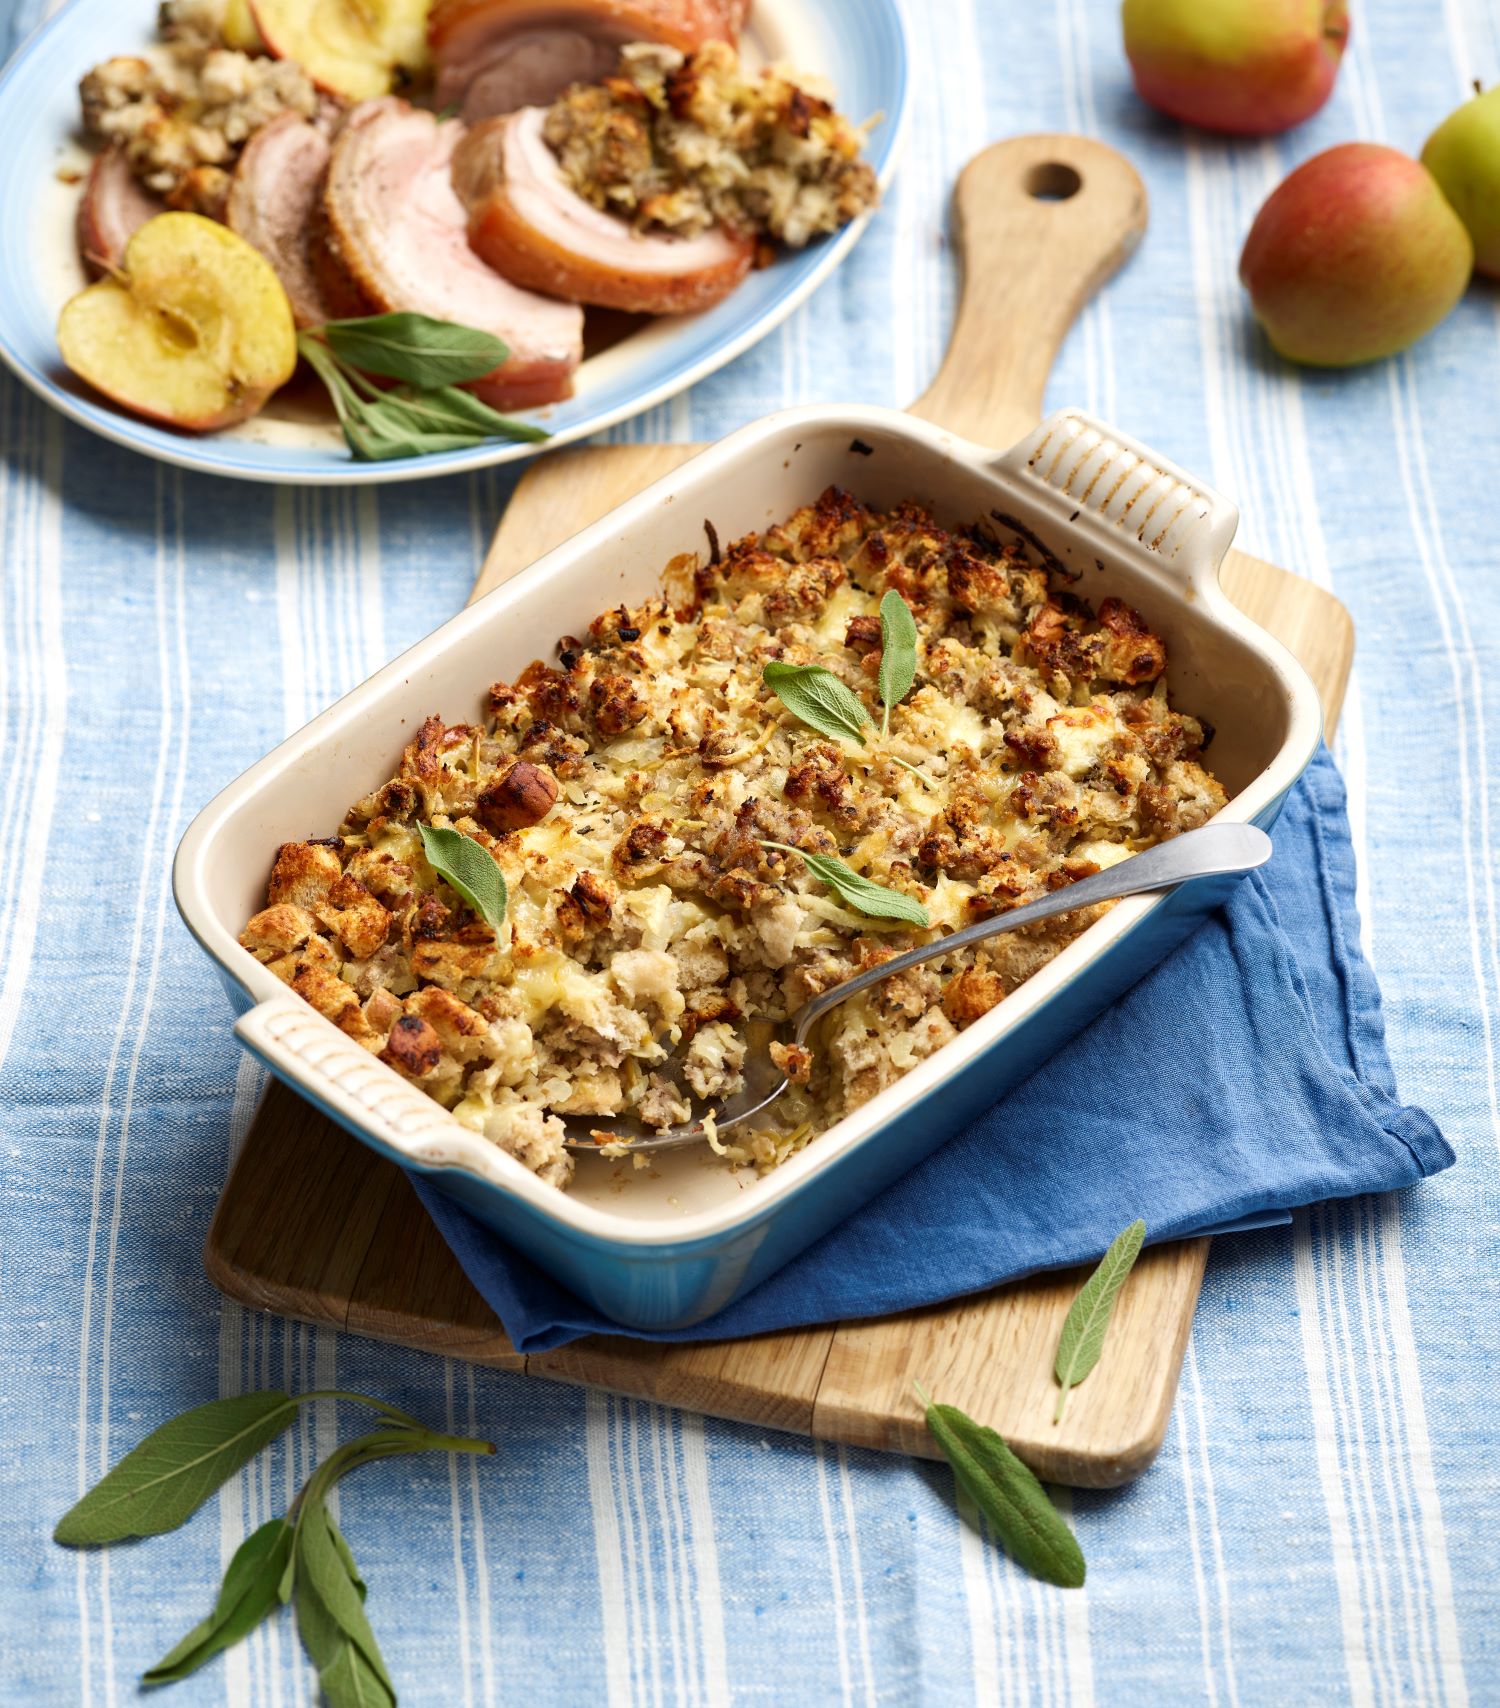 Roasted Pork Loin with Cheese & Apple Stuffing